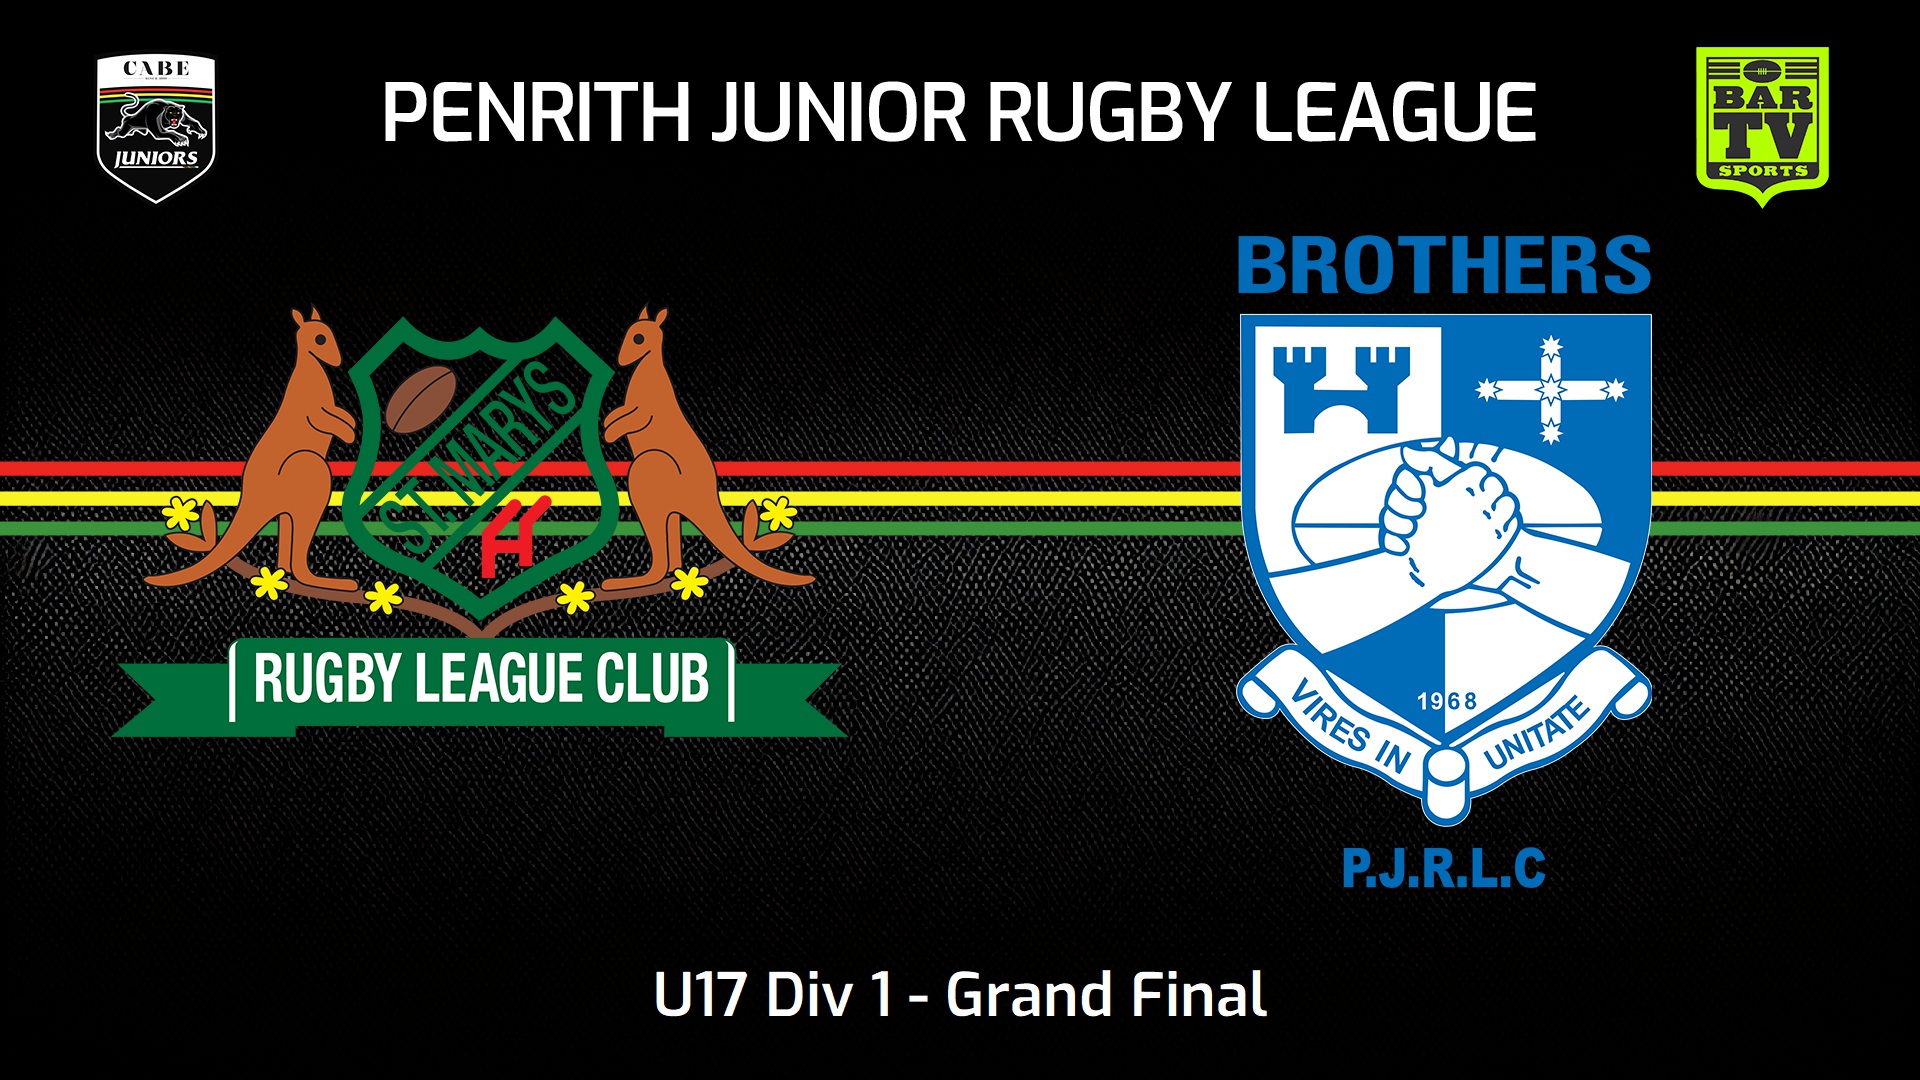 Penrith and District Junior Rugby League Grand Final - U17 Div 1